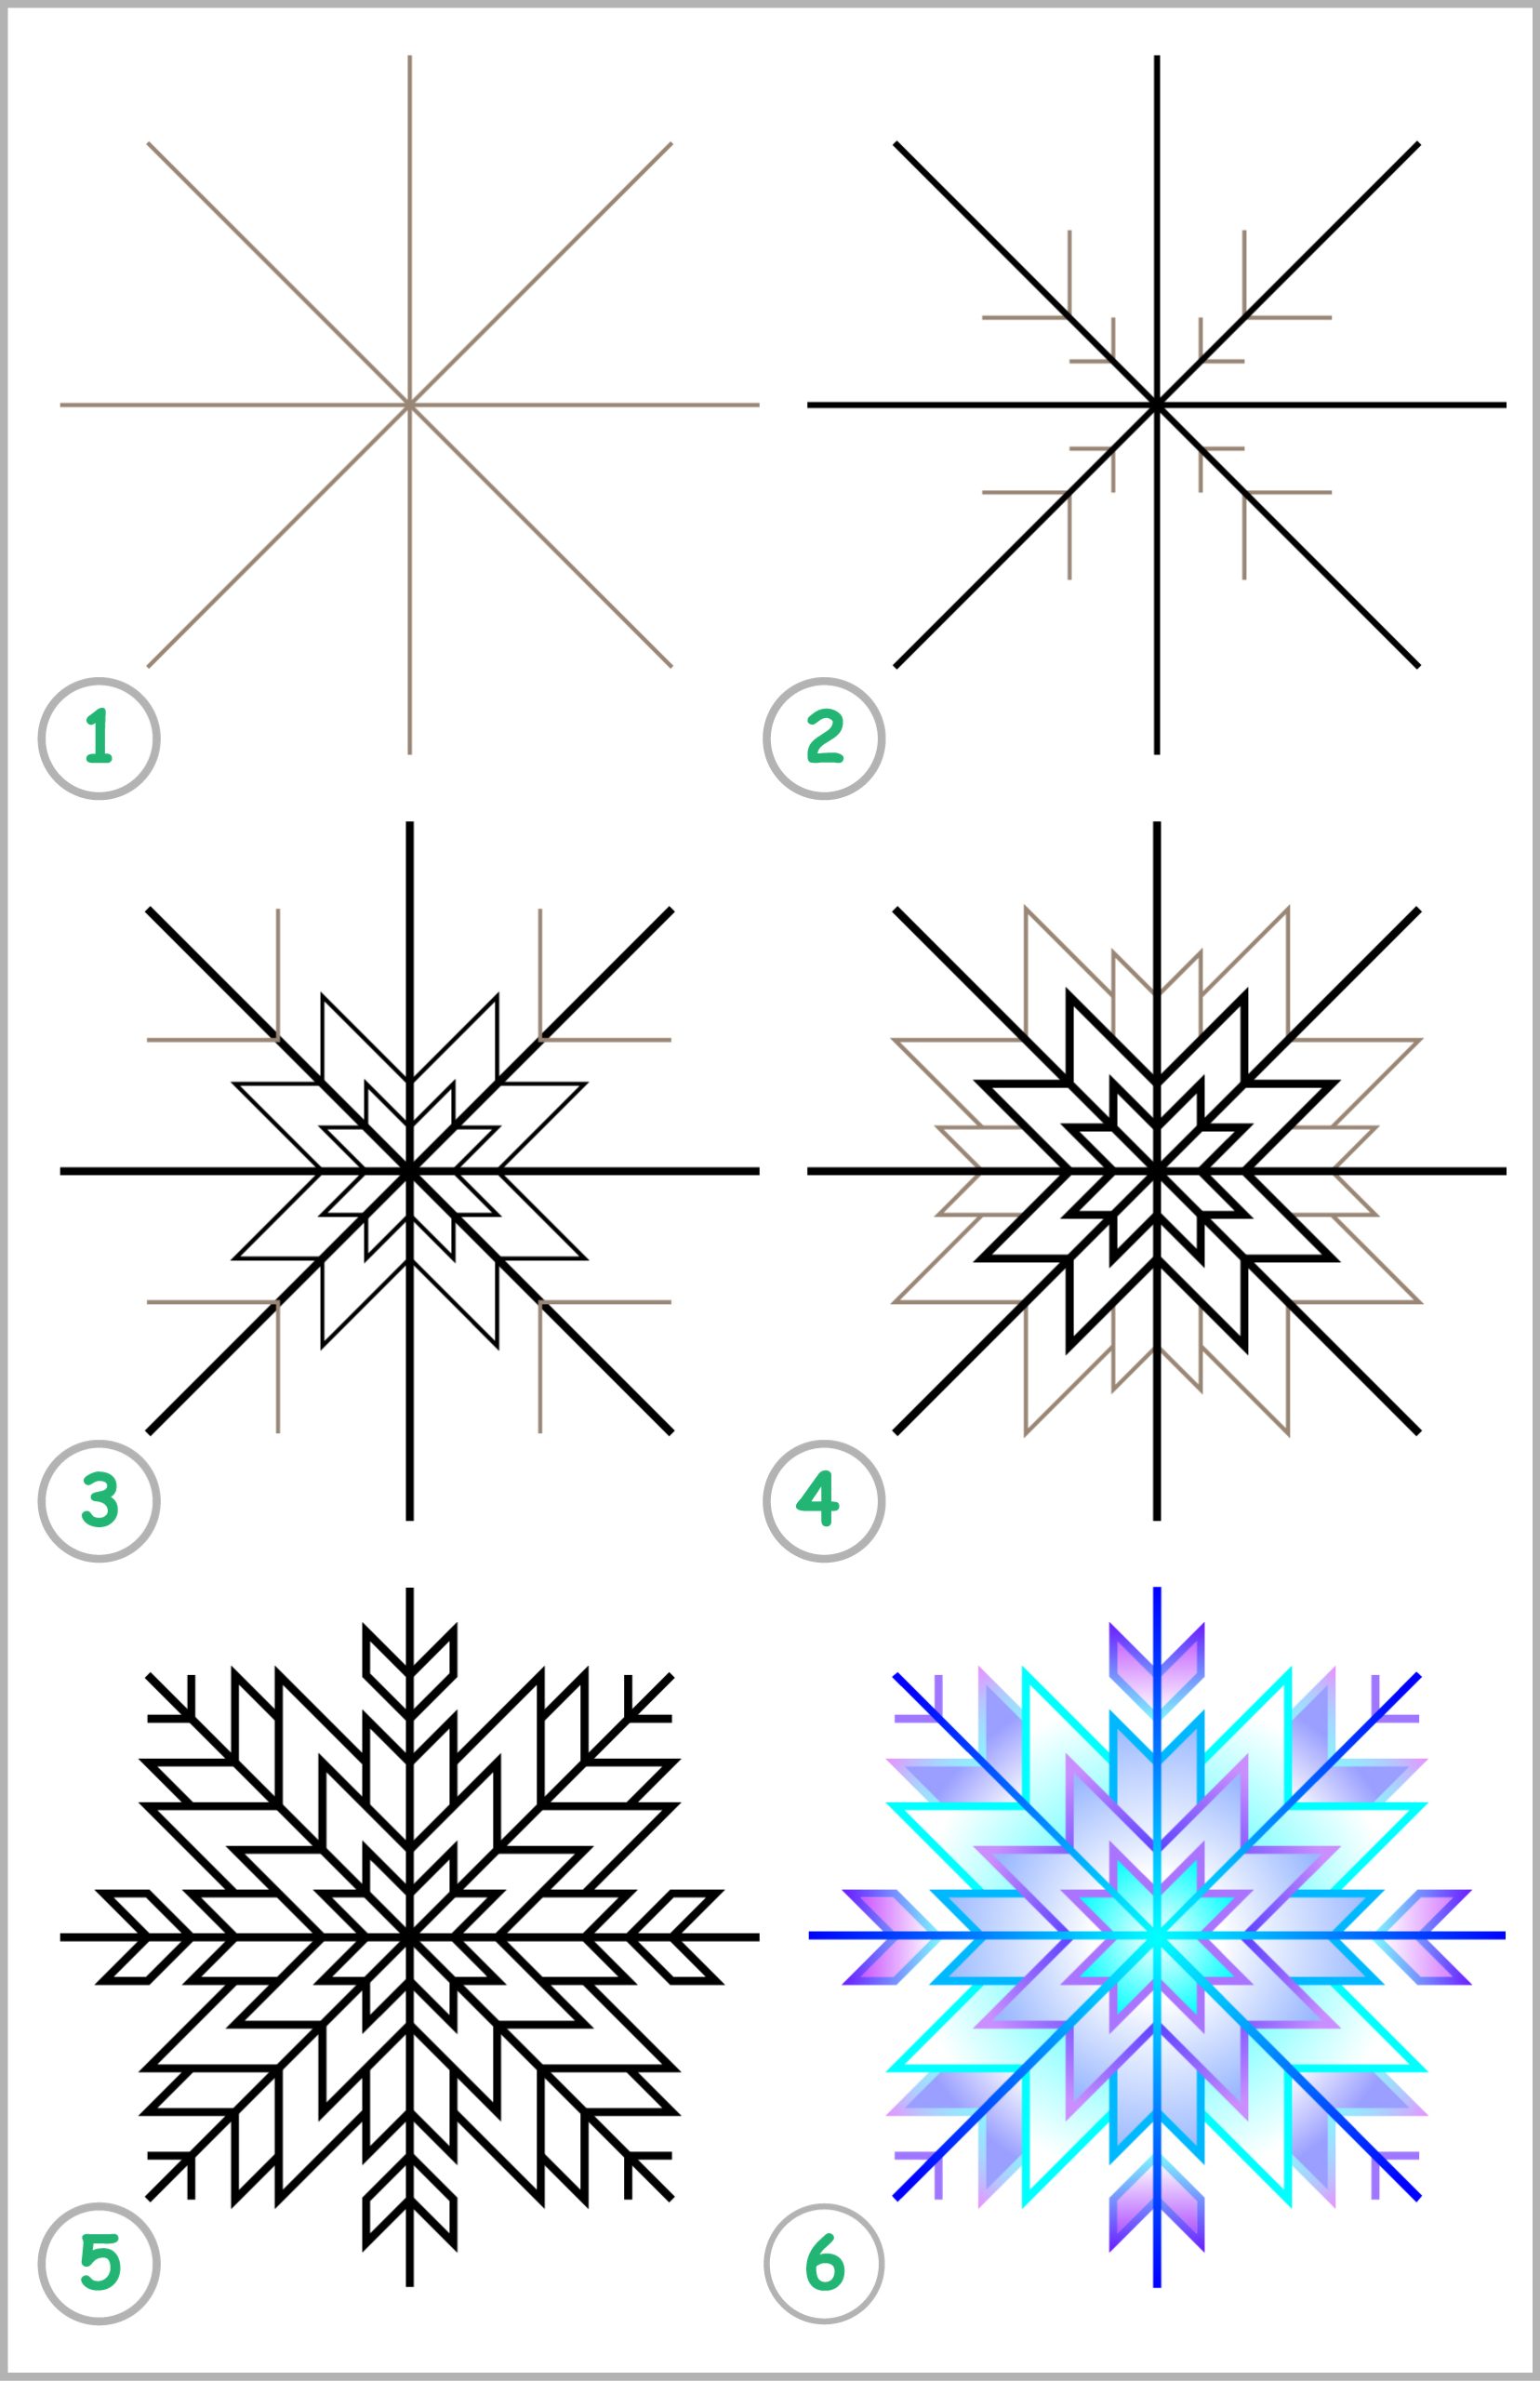 how to draw a snowflake step by step tutorial with 6 total steps